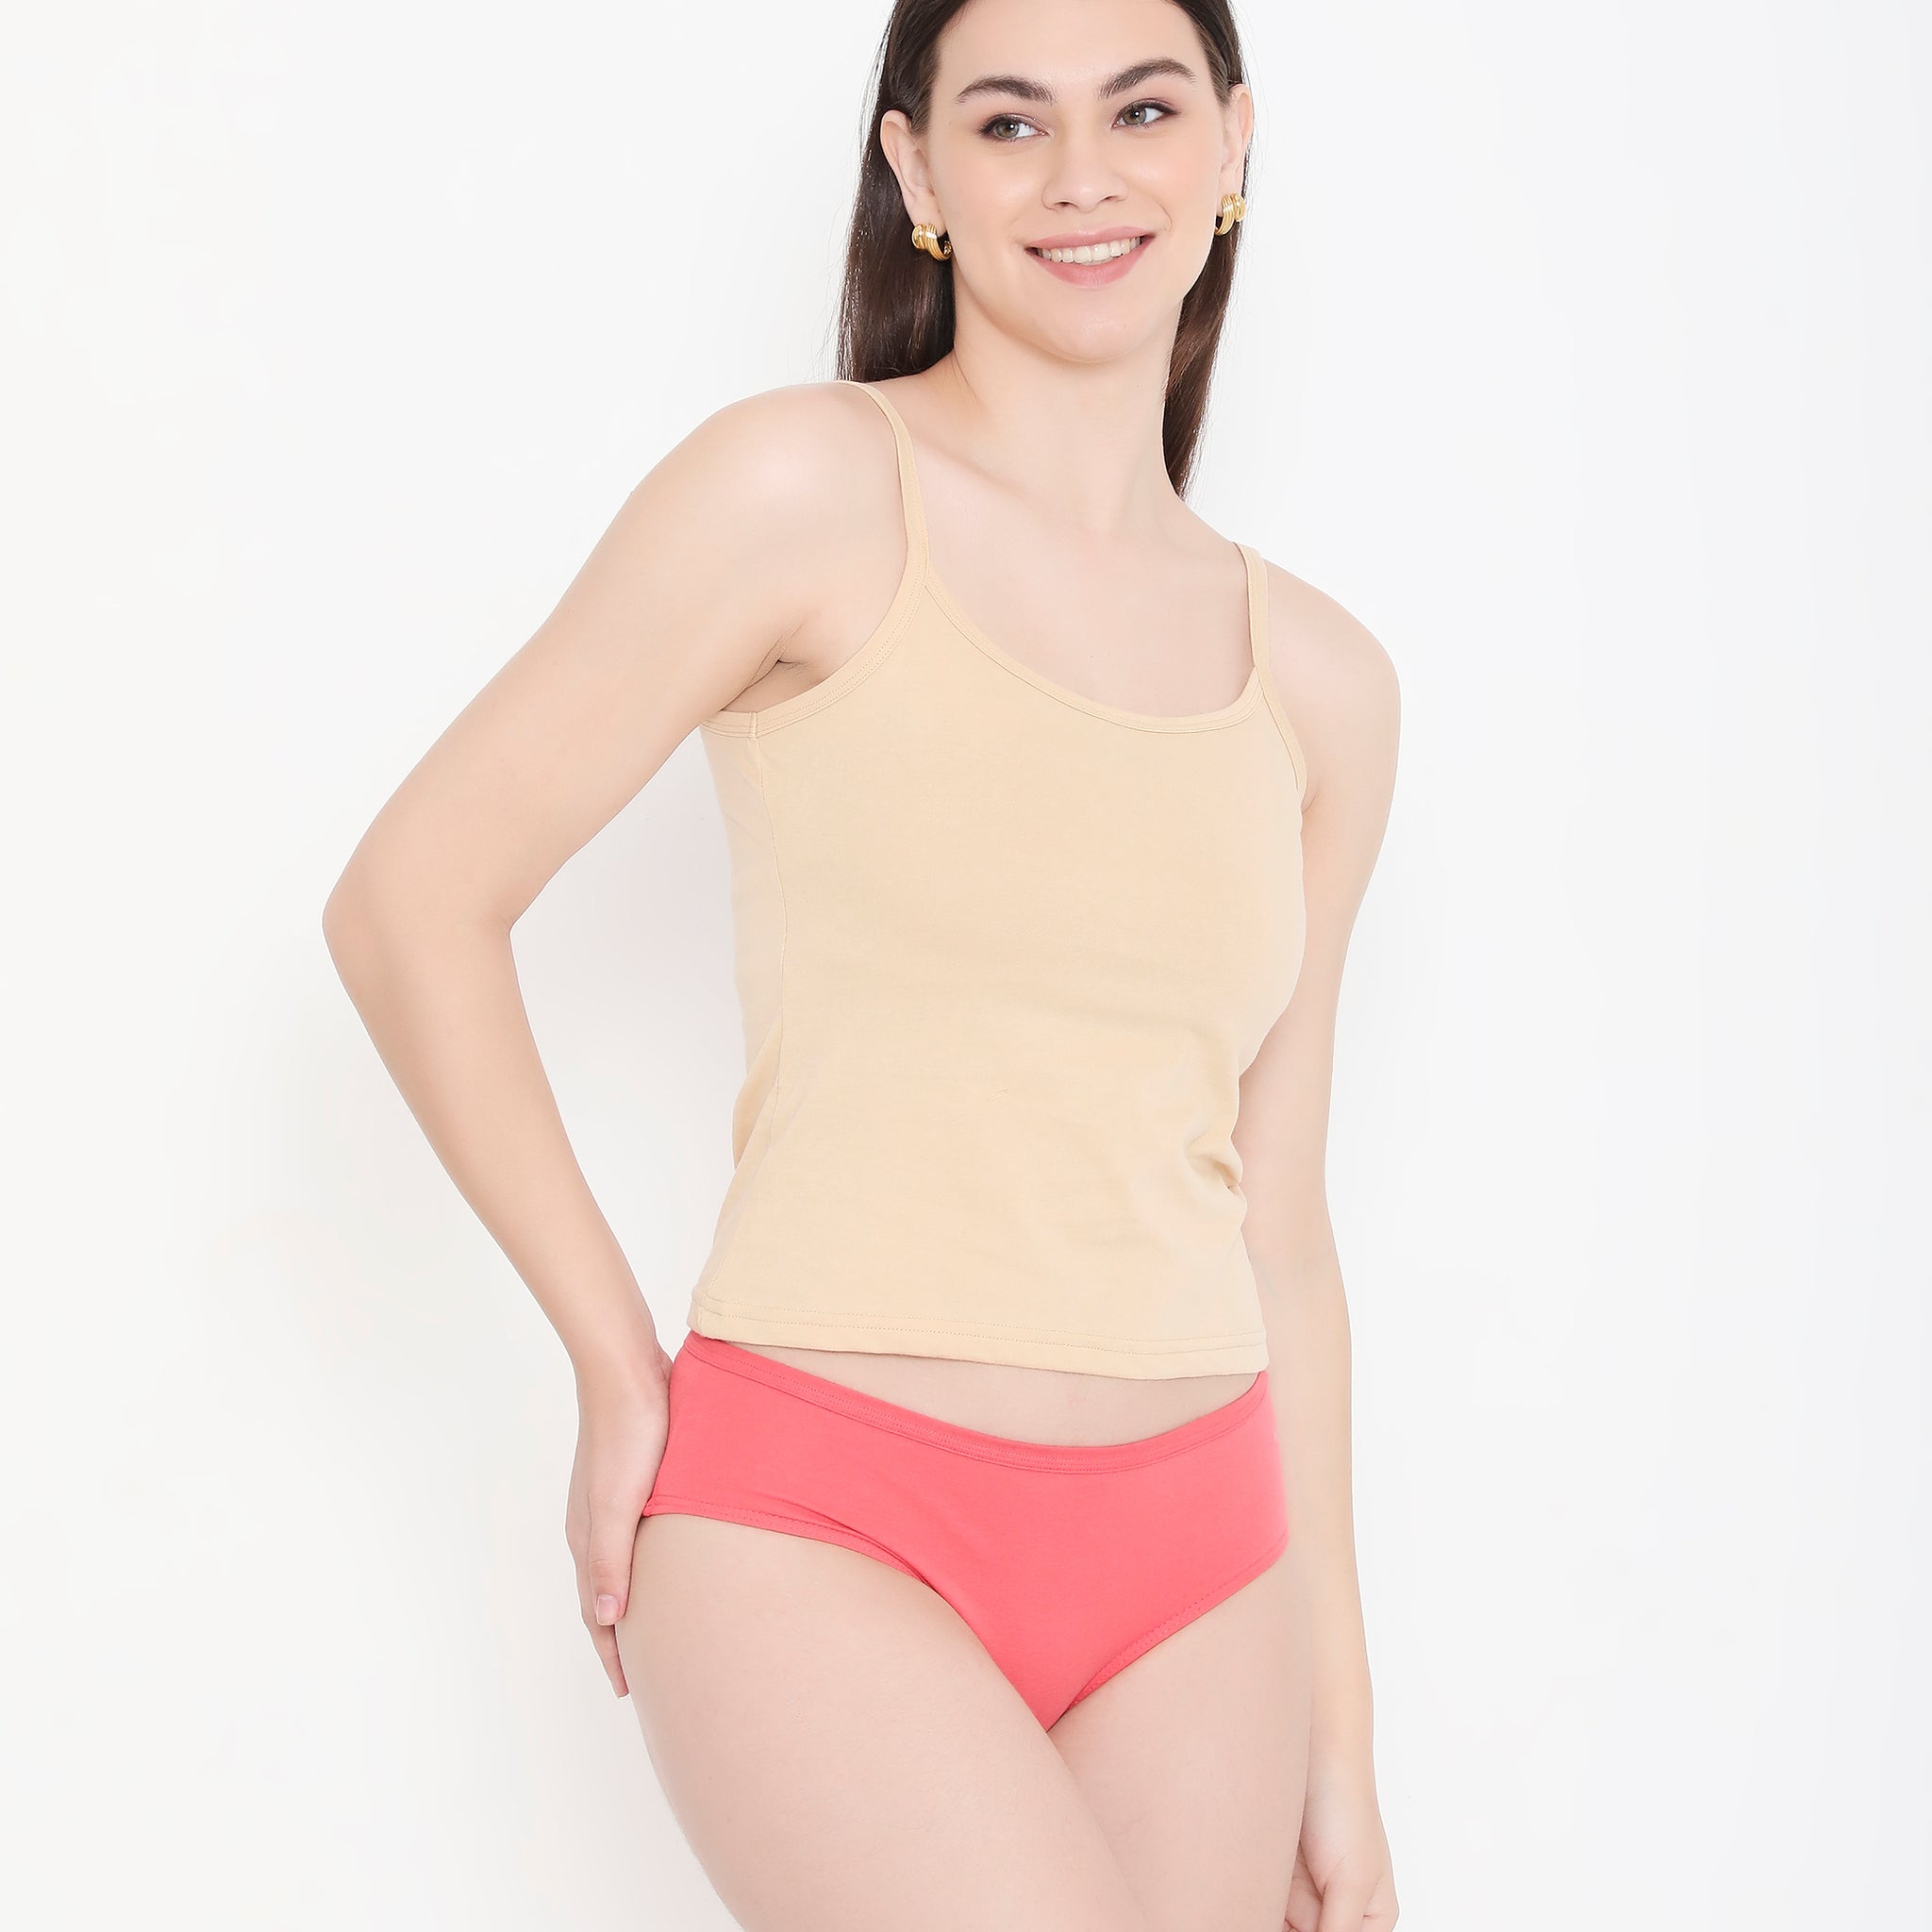 Solid Skin Pure Cotton Innerwear Camisole with Slender Straps for Women